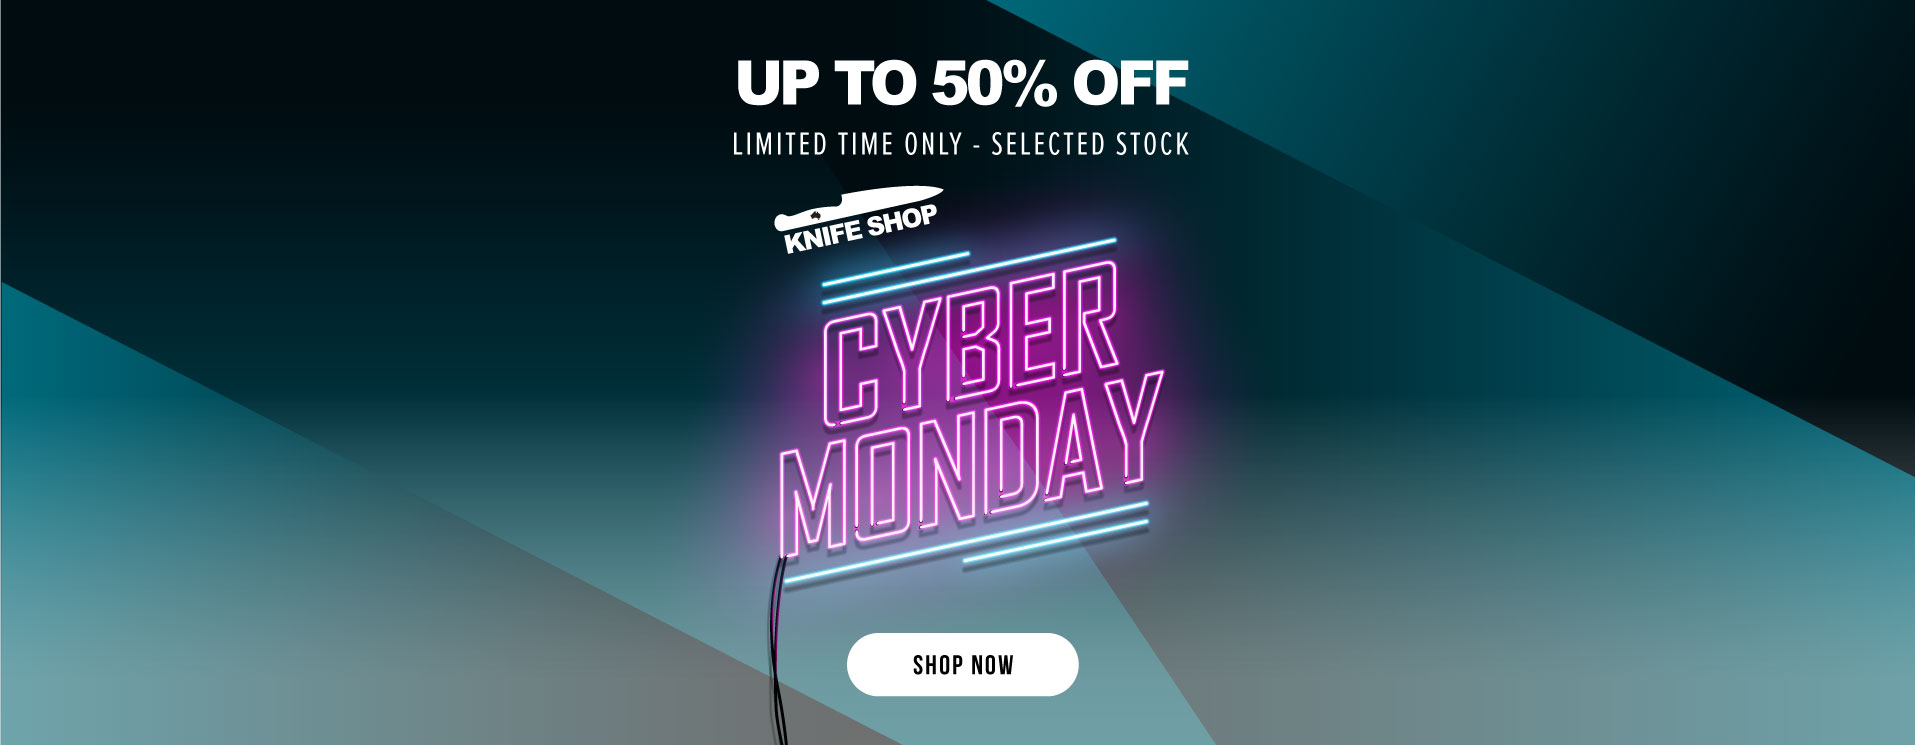 CYBER MONDAY CLEAROUT SALE